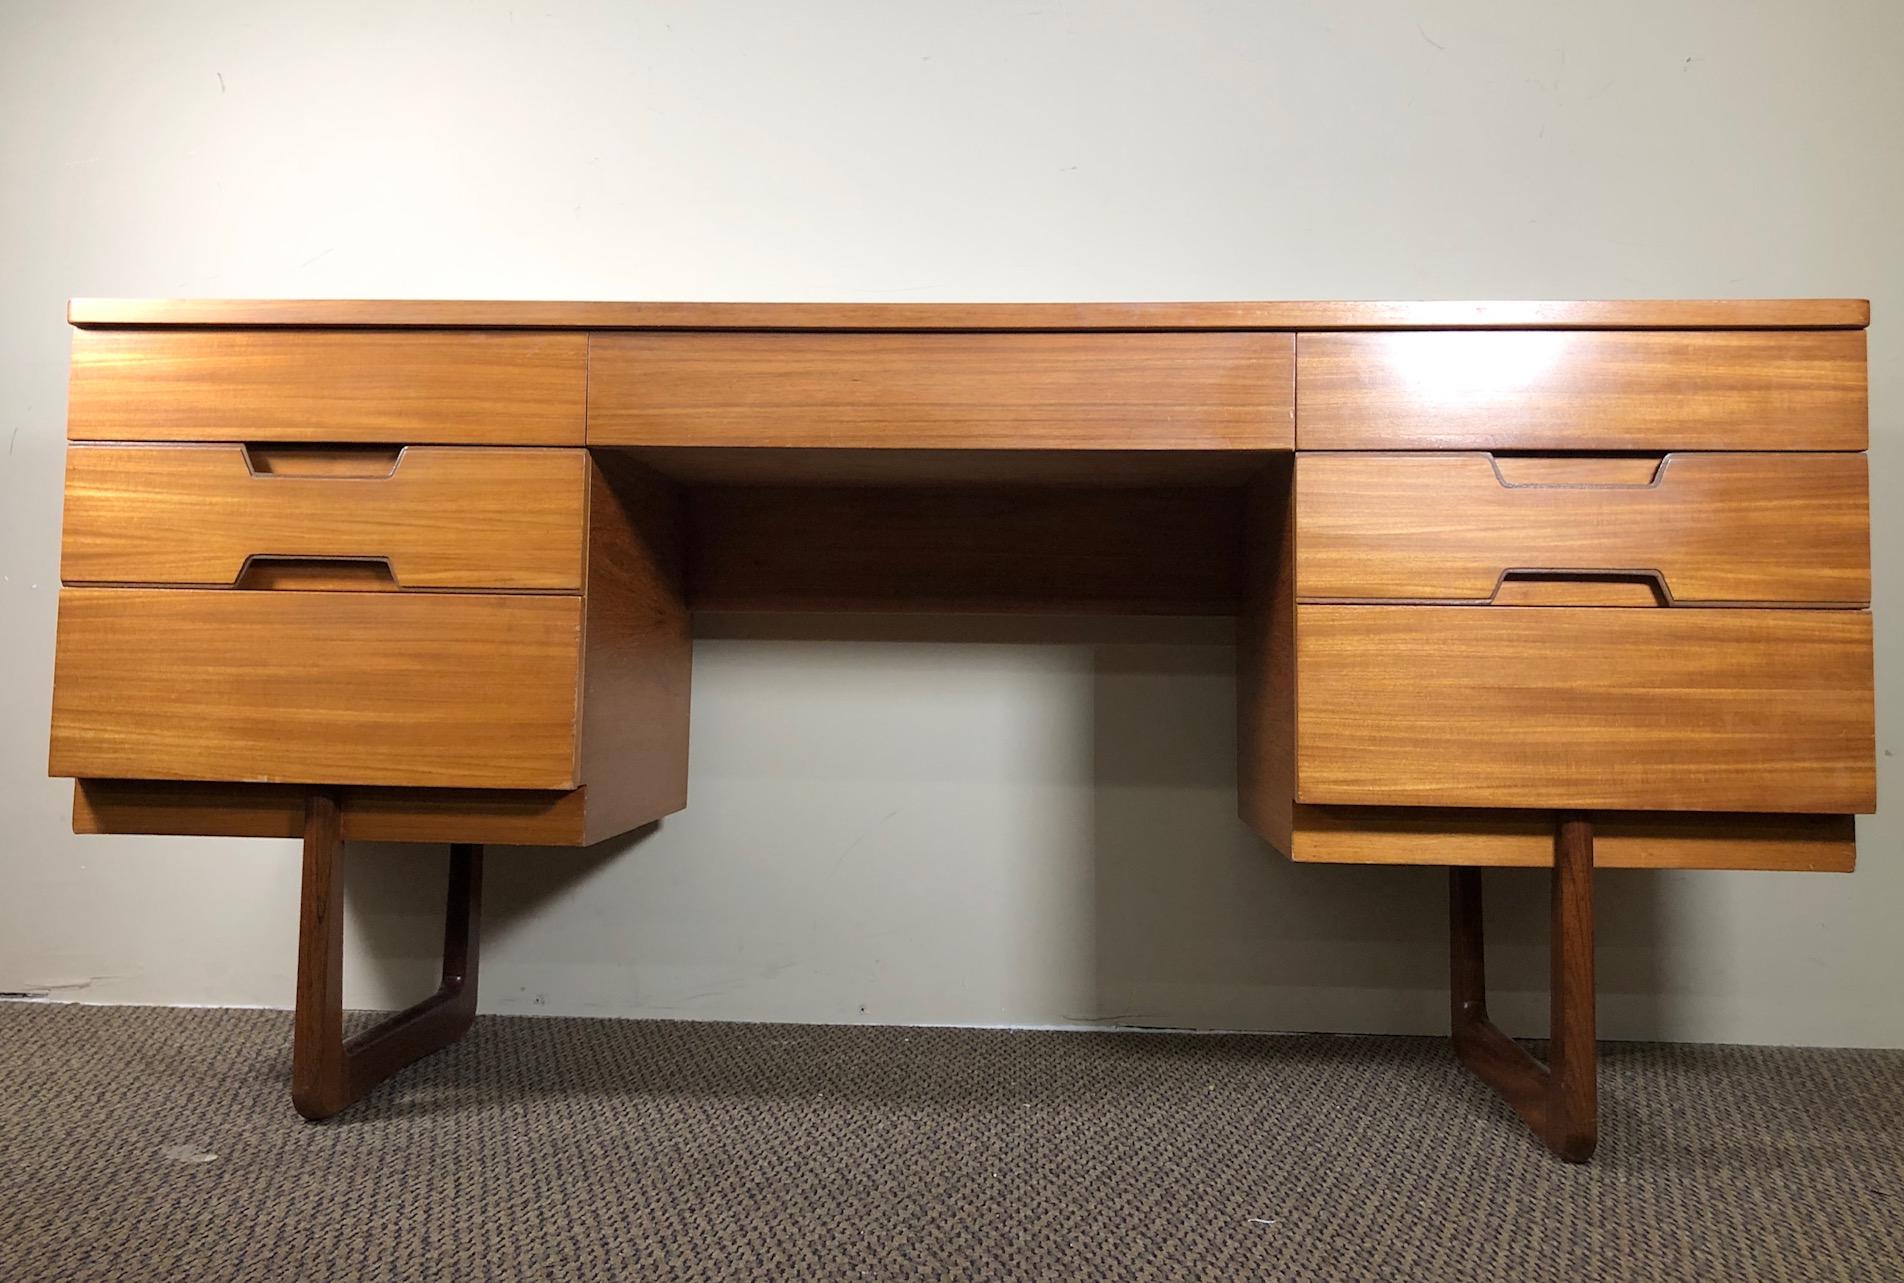 Fantastic teak vanity or desk by Uniflex. Originally designed as a vanity but can also be used as a desk.
It has 3 drawers on each side and one secret drawer in the middle.
The back is unfinished.
Dimensions: 59.75